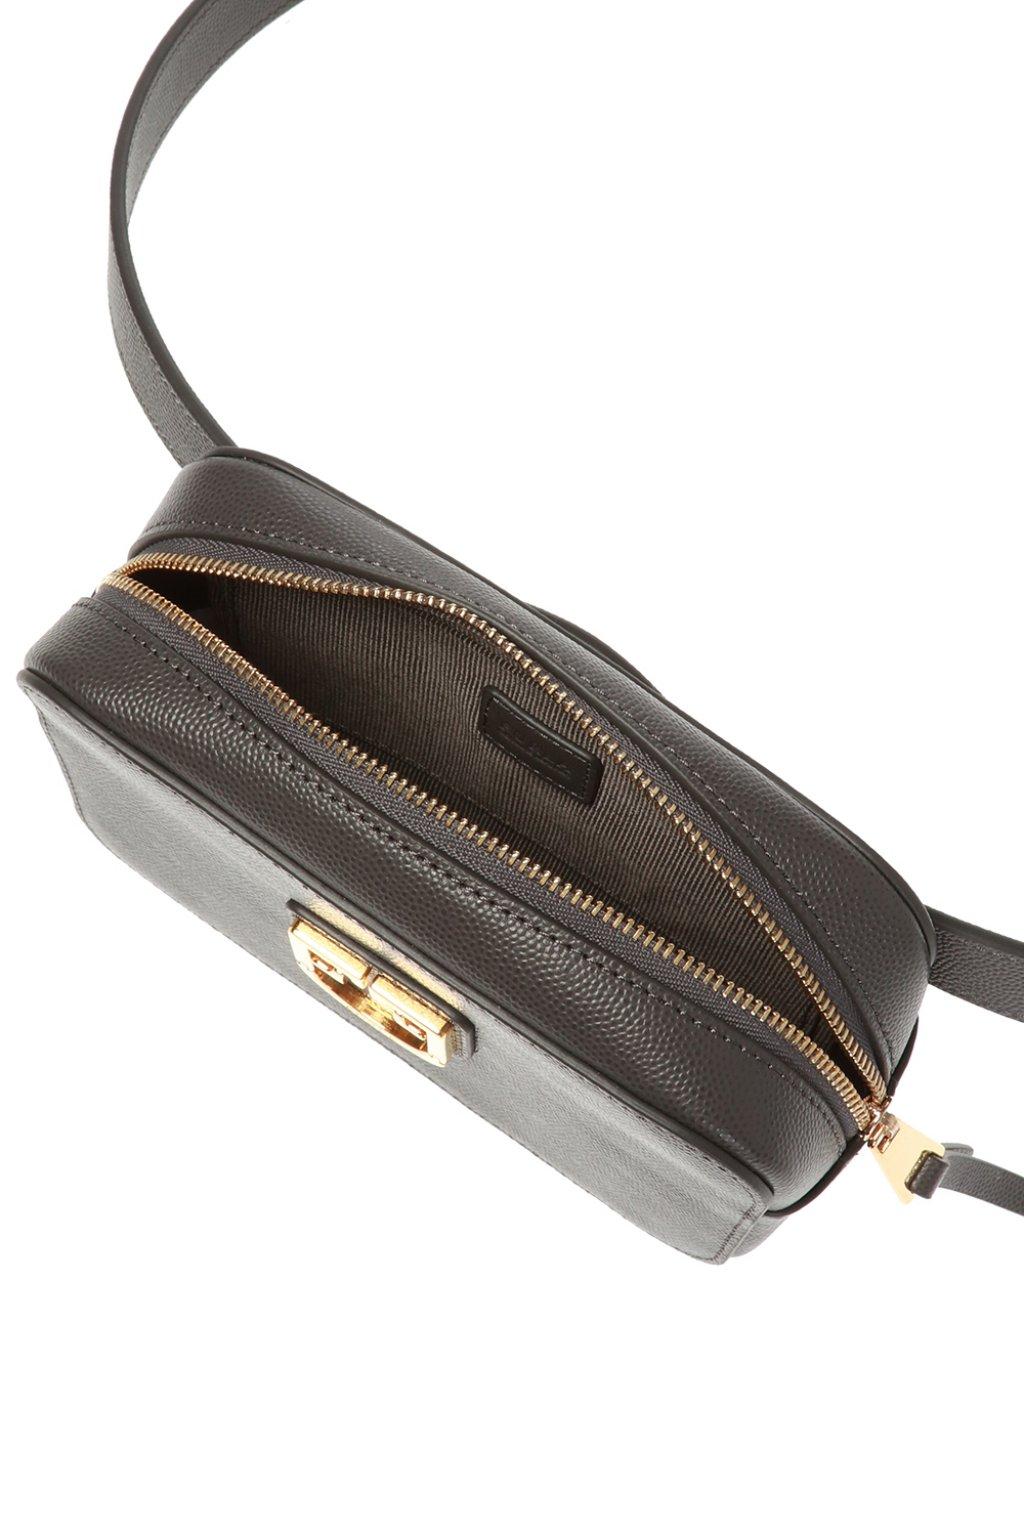 Furla Leather 'belvedere' Belt Bag With Logo in Grey (Gray) - Lyst